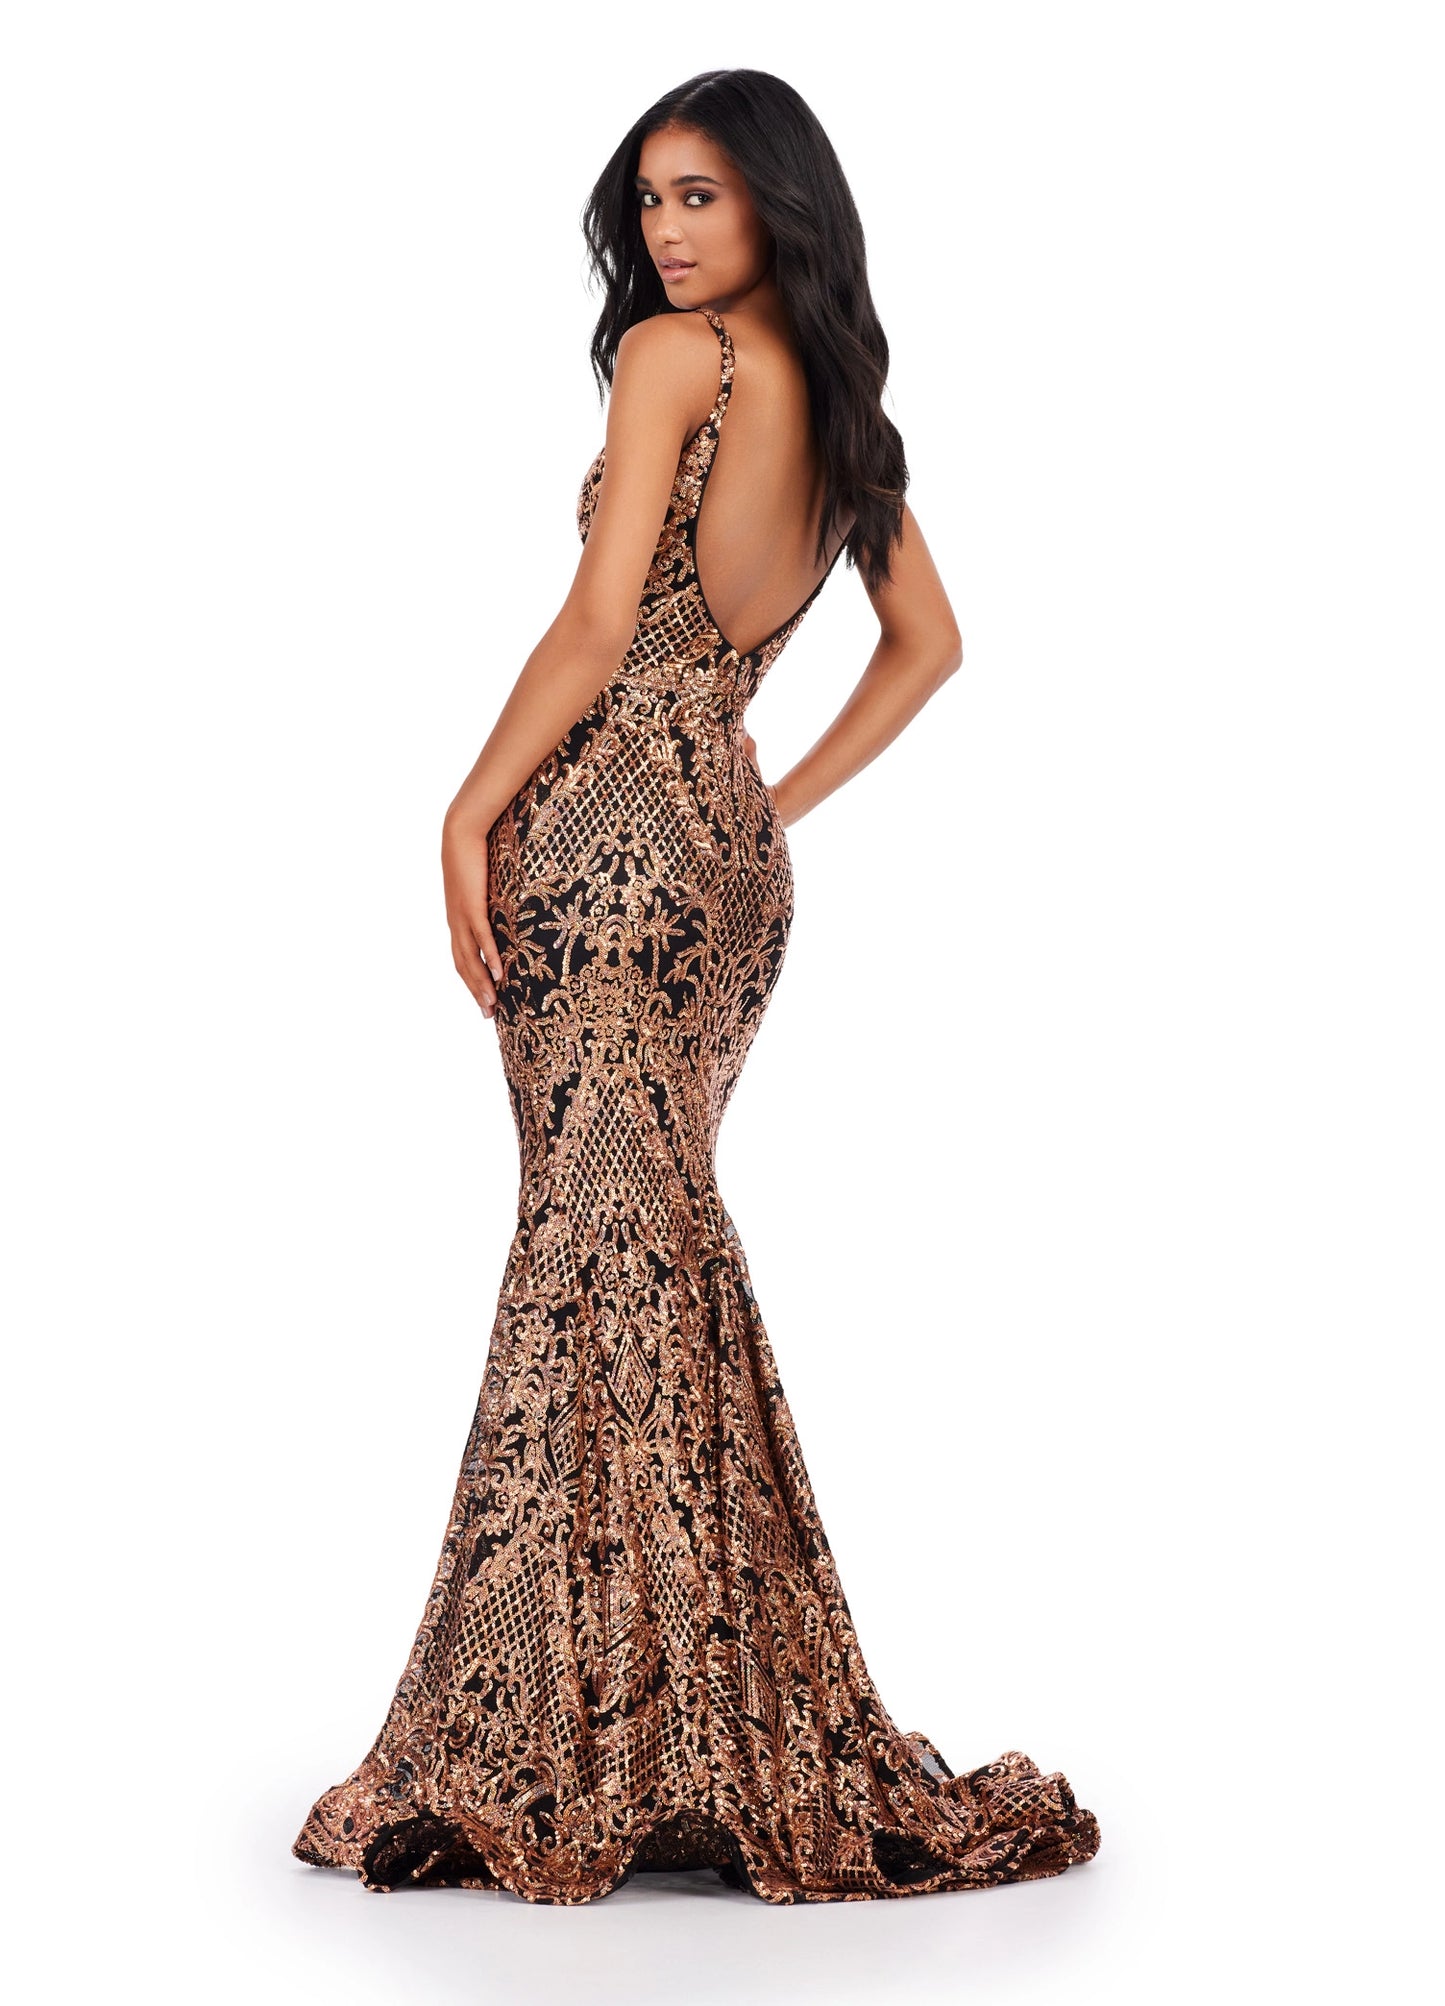 This eye-catching Ashley Lauren 11466 Long Sequin Mermaid Prom Dress is sure to make a statement. The glamorous V-neck, backless design, and long mermaid skirt make this the ultimate formal gown. Perfect for making a lasting impression. A dress perfect for any event. This intricate stretch sequin gown features a V-Neckline and a low cut back.